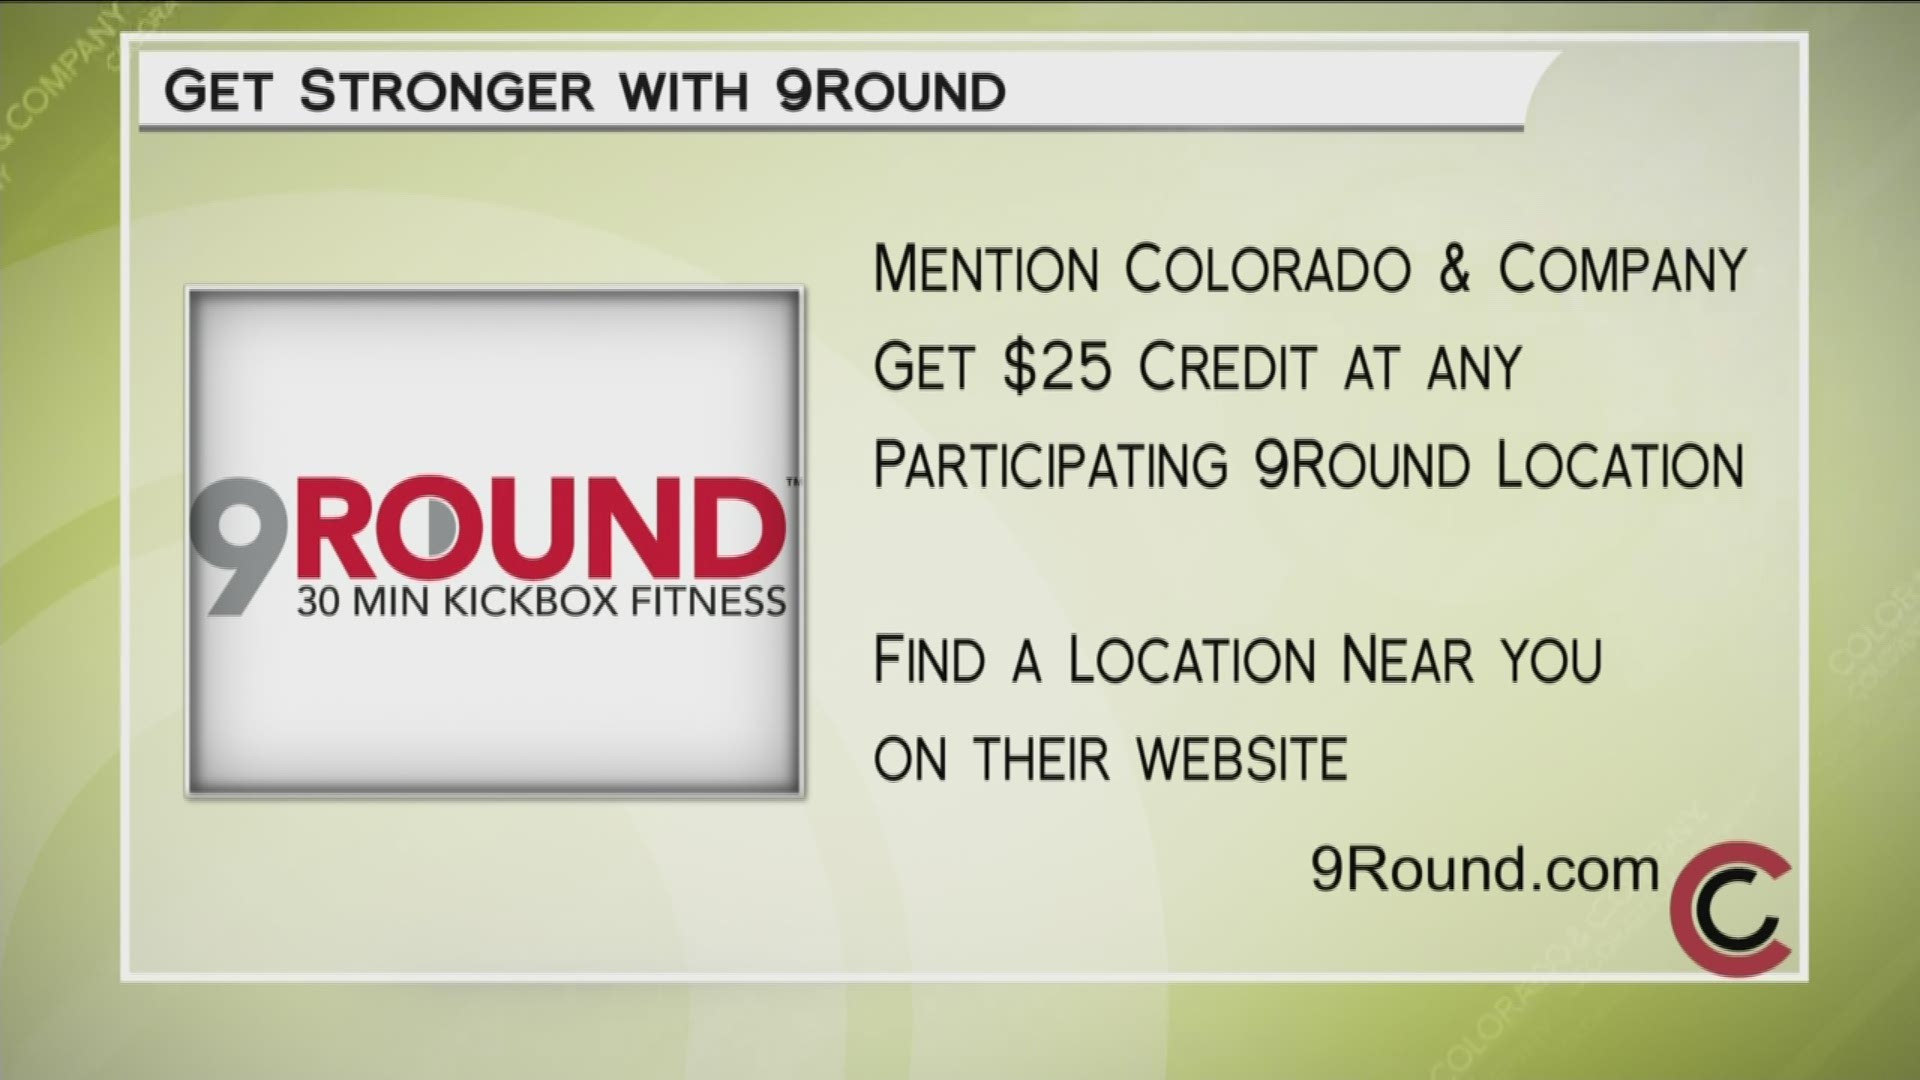 Mention Colorado and Company when you visit any of the 9Round locations near you. You'll get a $25 credit! Learn more at 9Round.com.